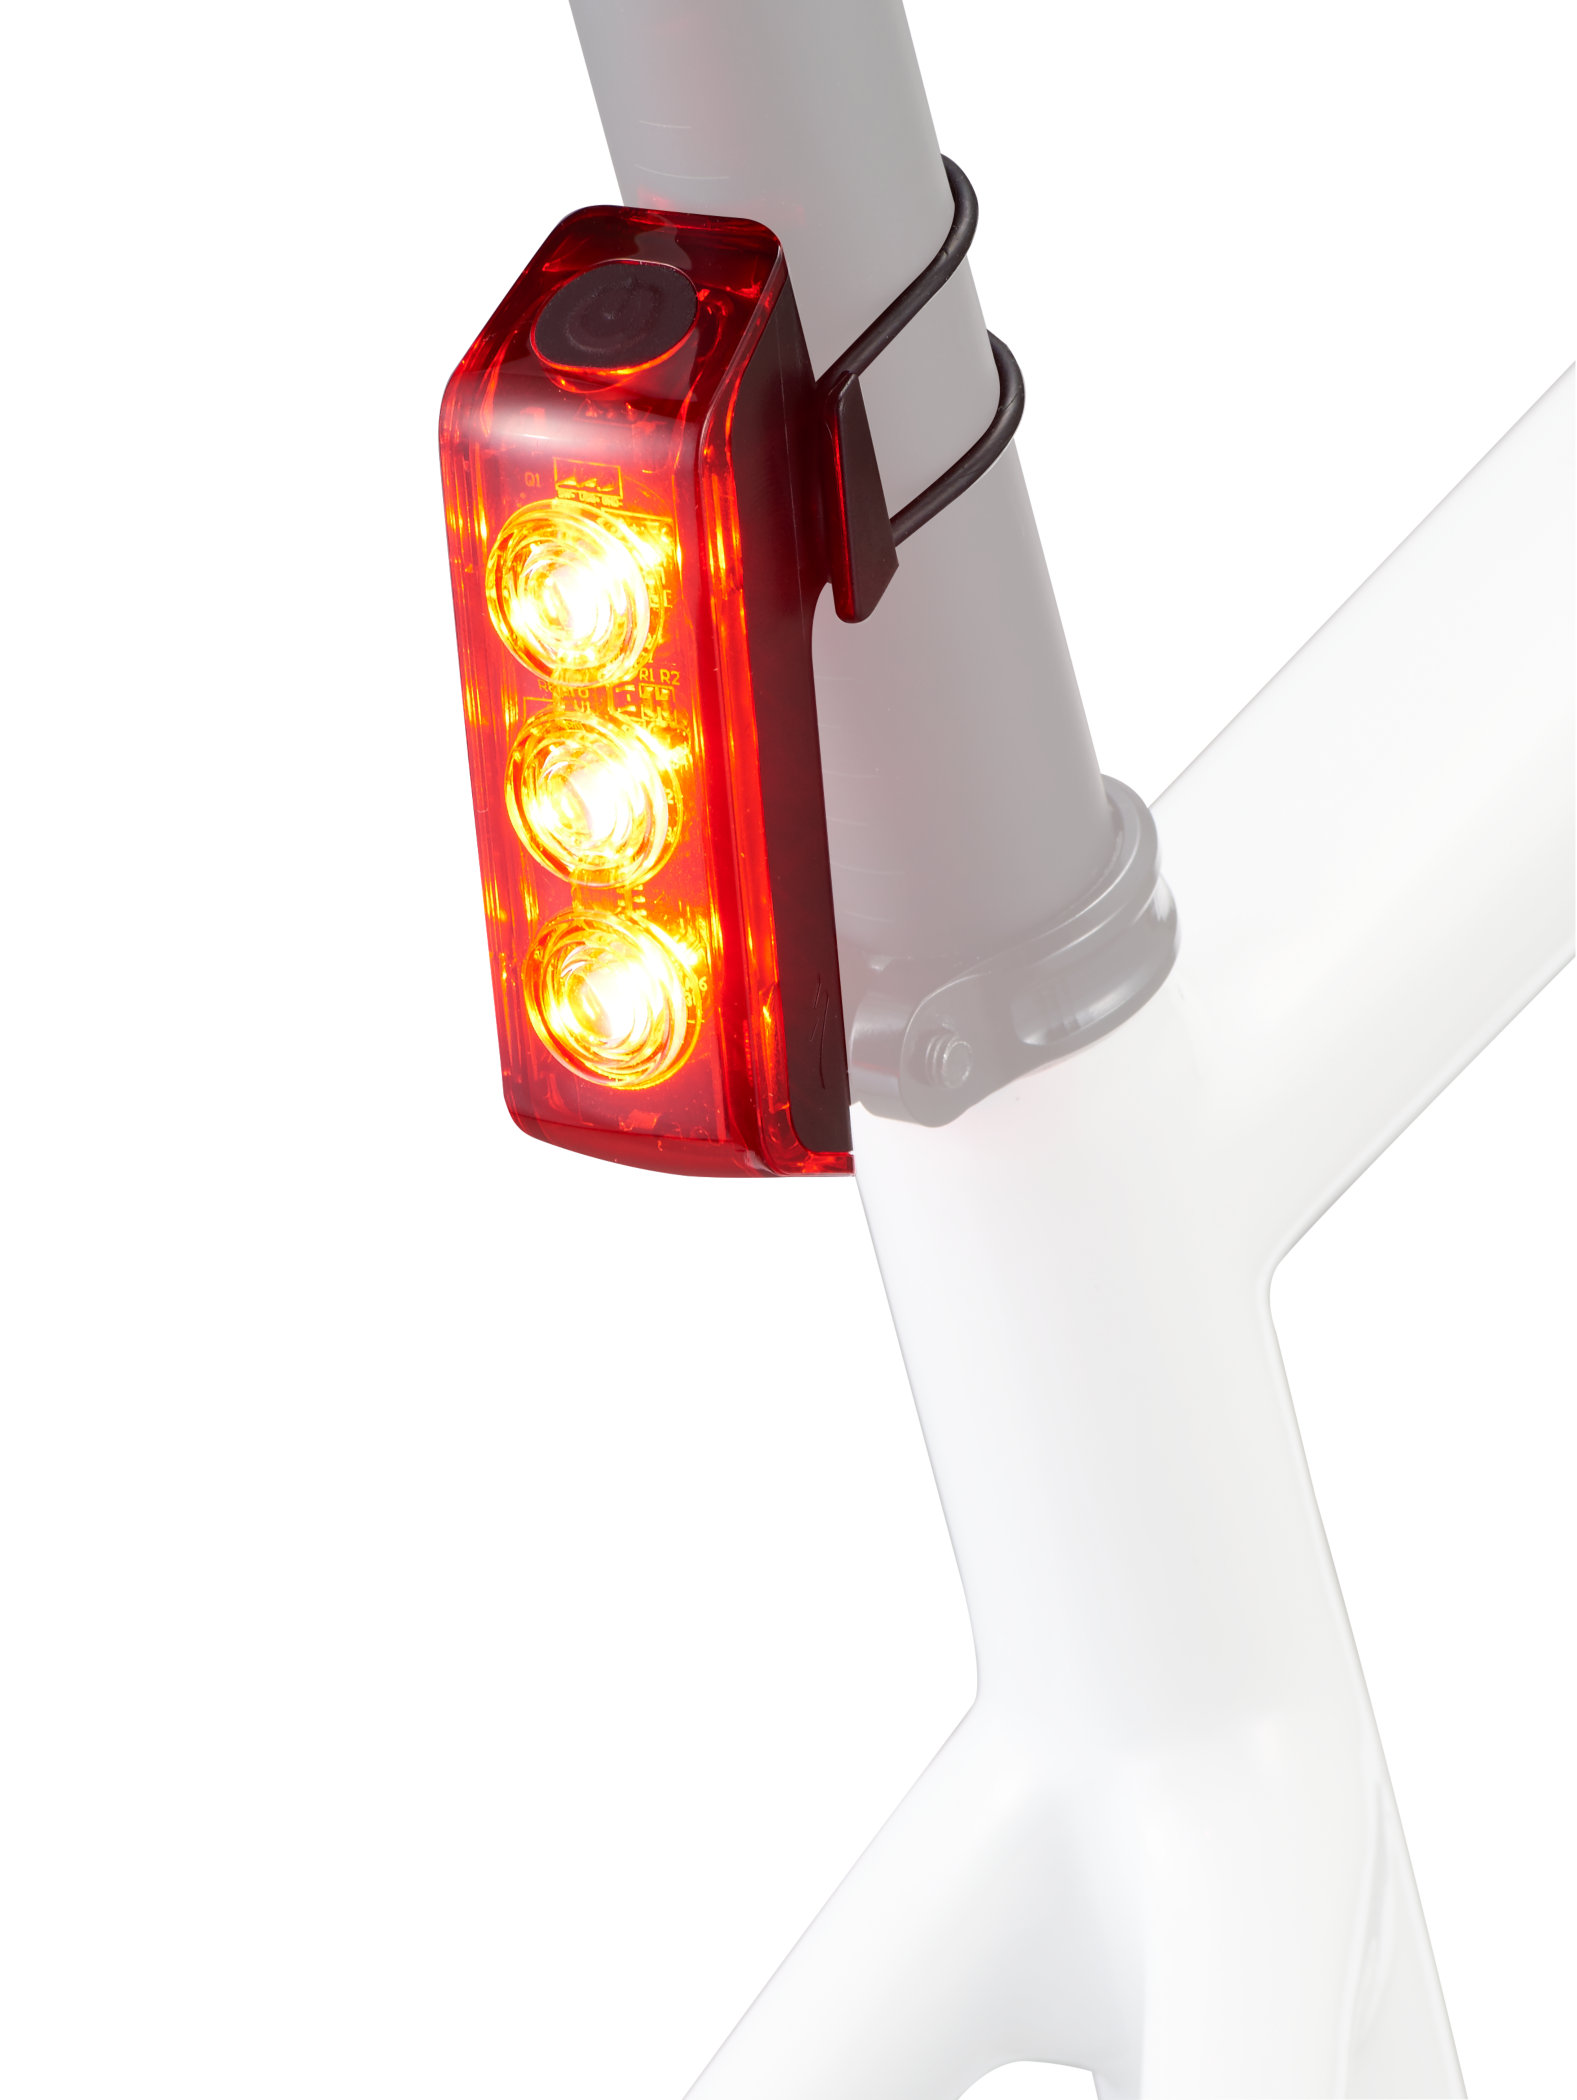 Flux 250R Taillight | Specialized.com